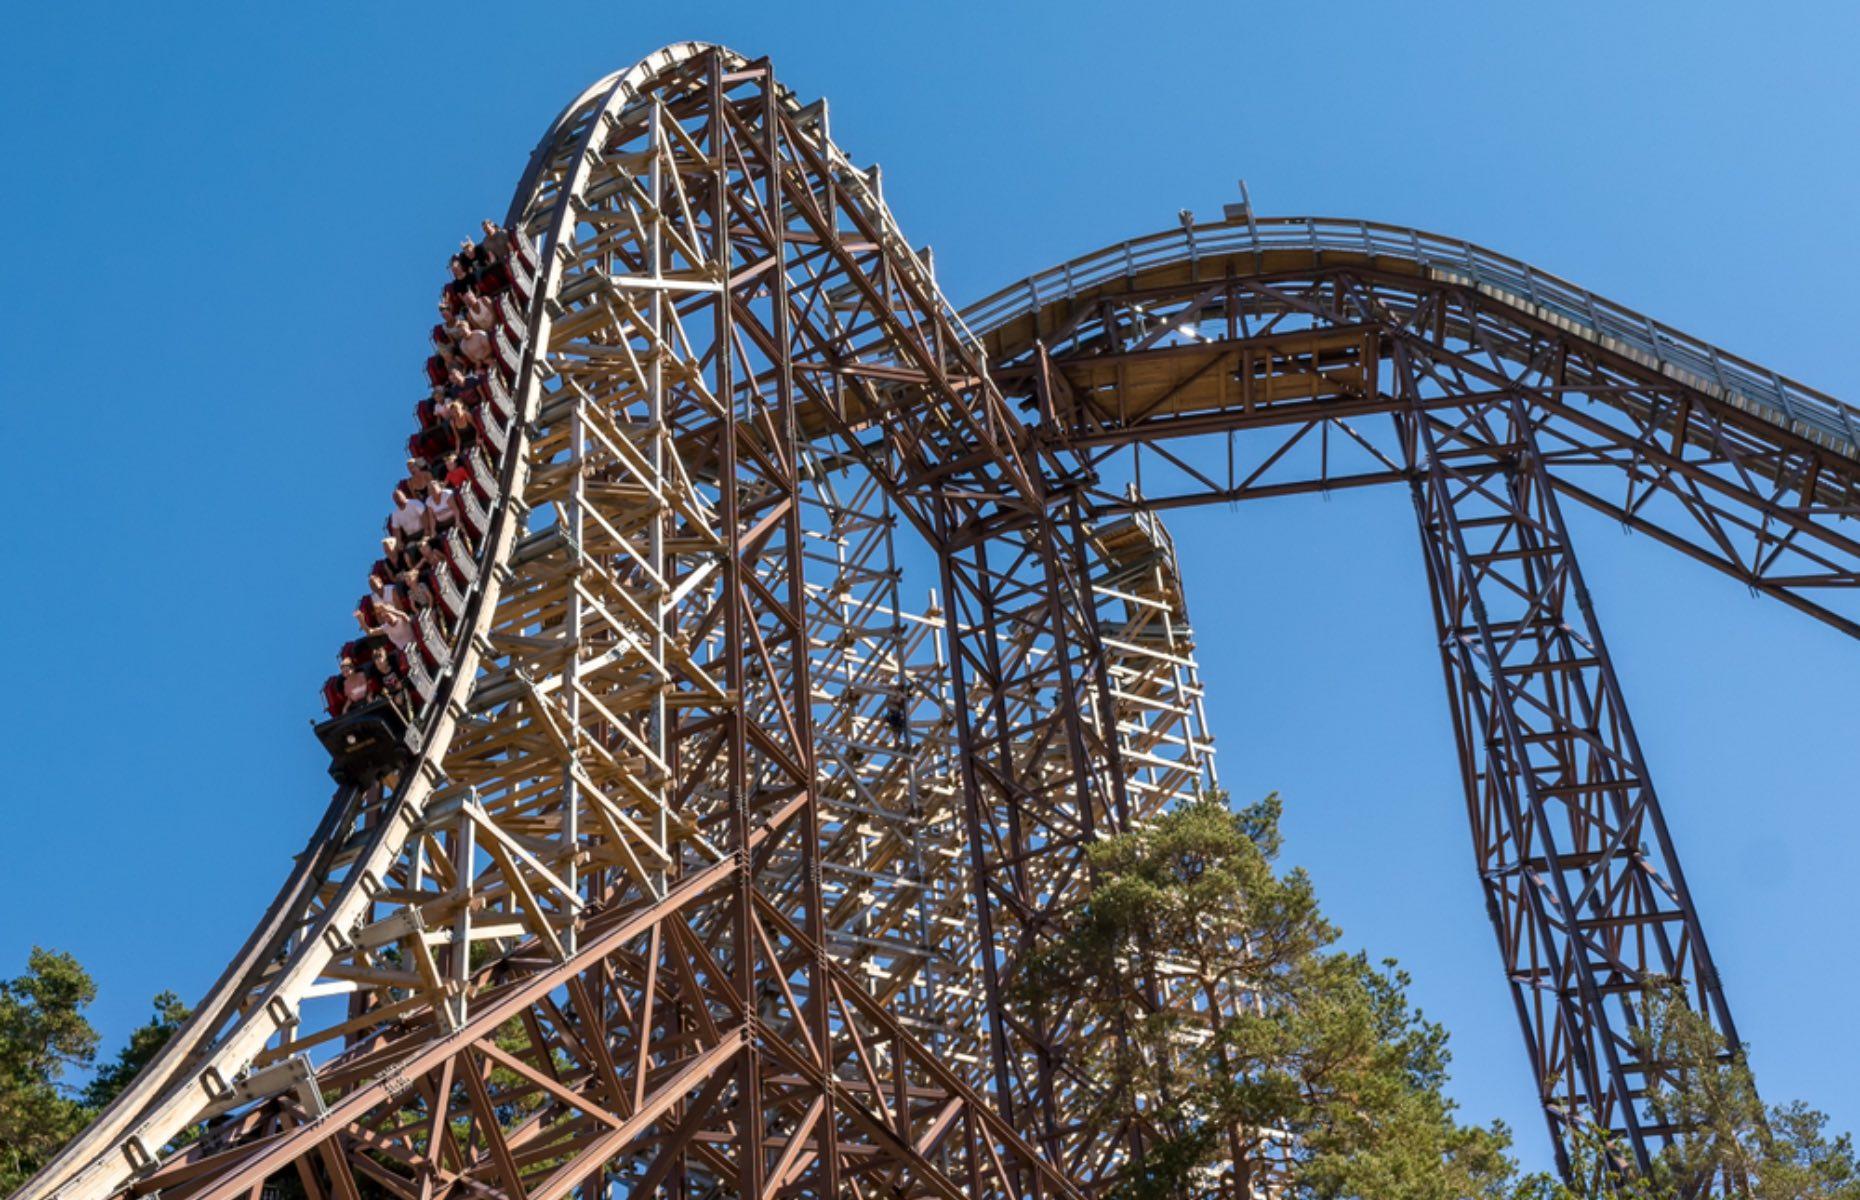 <p>It is another tie, this time for most inversions on a wooden roller coaster. Both have three inversions, which is quite a feat on wooden tracks.</p>  <p>Reaching speeds of nearly 72 miles per hour, Wildfire is slightly quicker than Outlaw Run (68 miles per hour).</p>